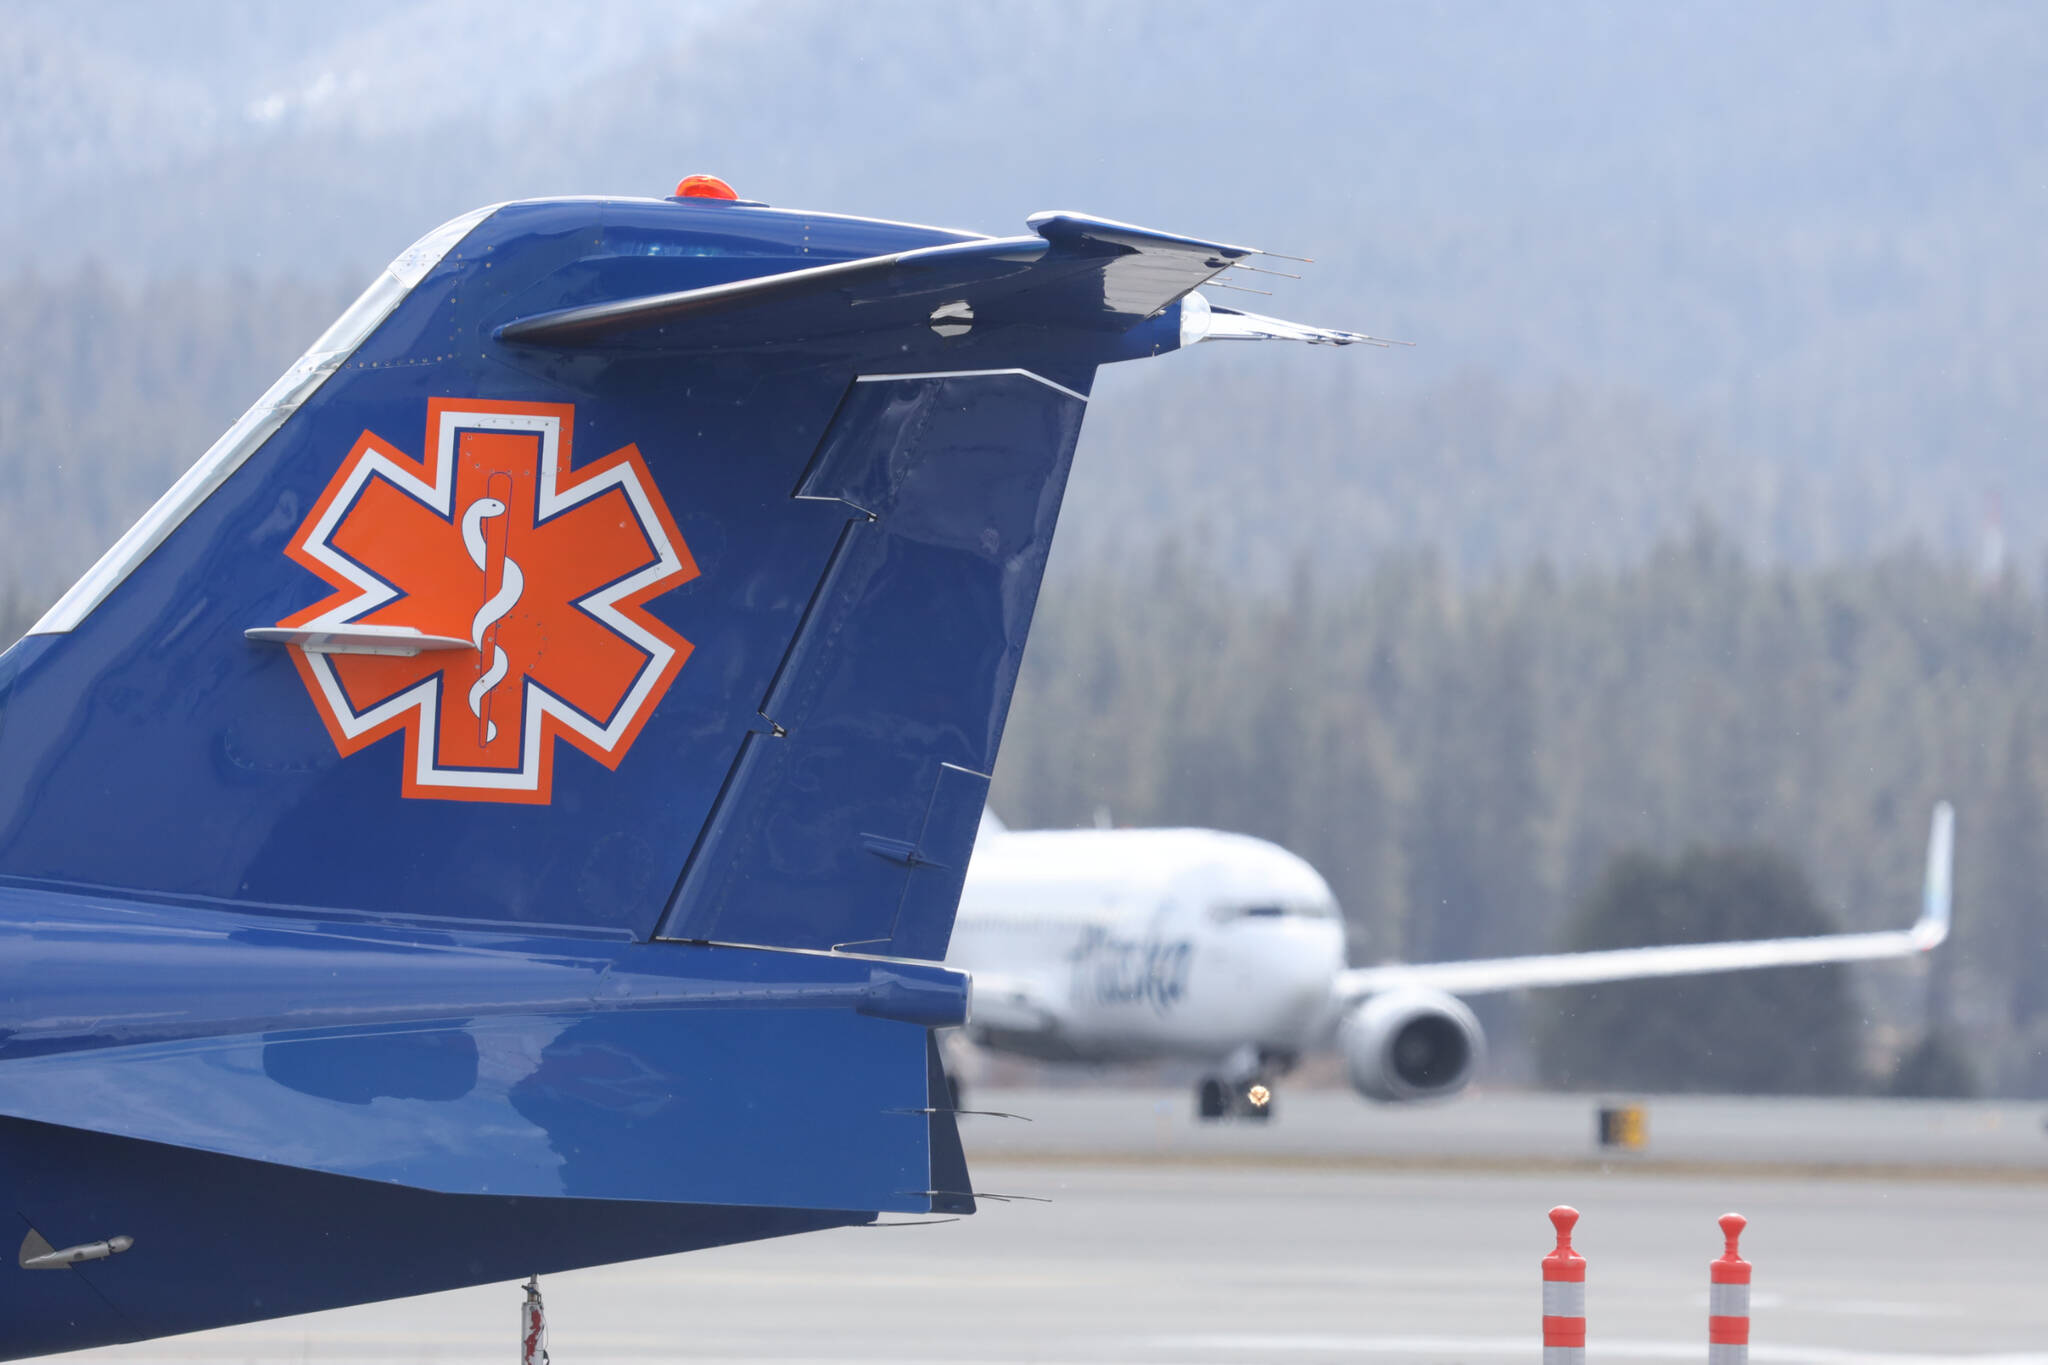 Clarise Larson / Juneau Empire
A LifeMed Alaska aircraft sits outside near Juneau International Airport on Monday afternoon. The nonprofit air medical service announced it will be closing its base in Juneau.